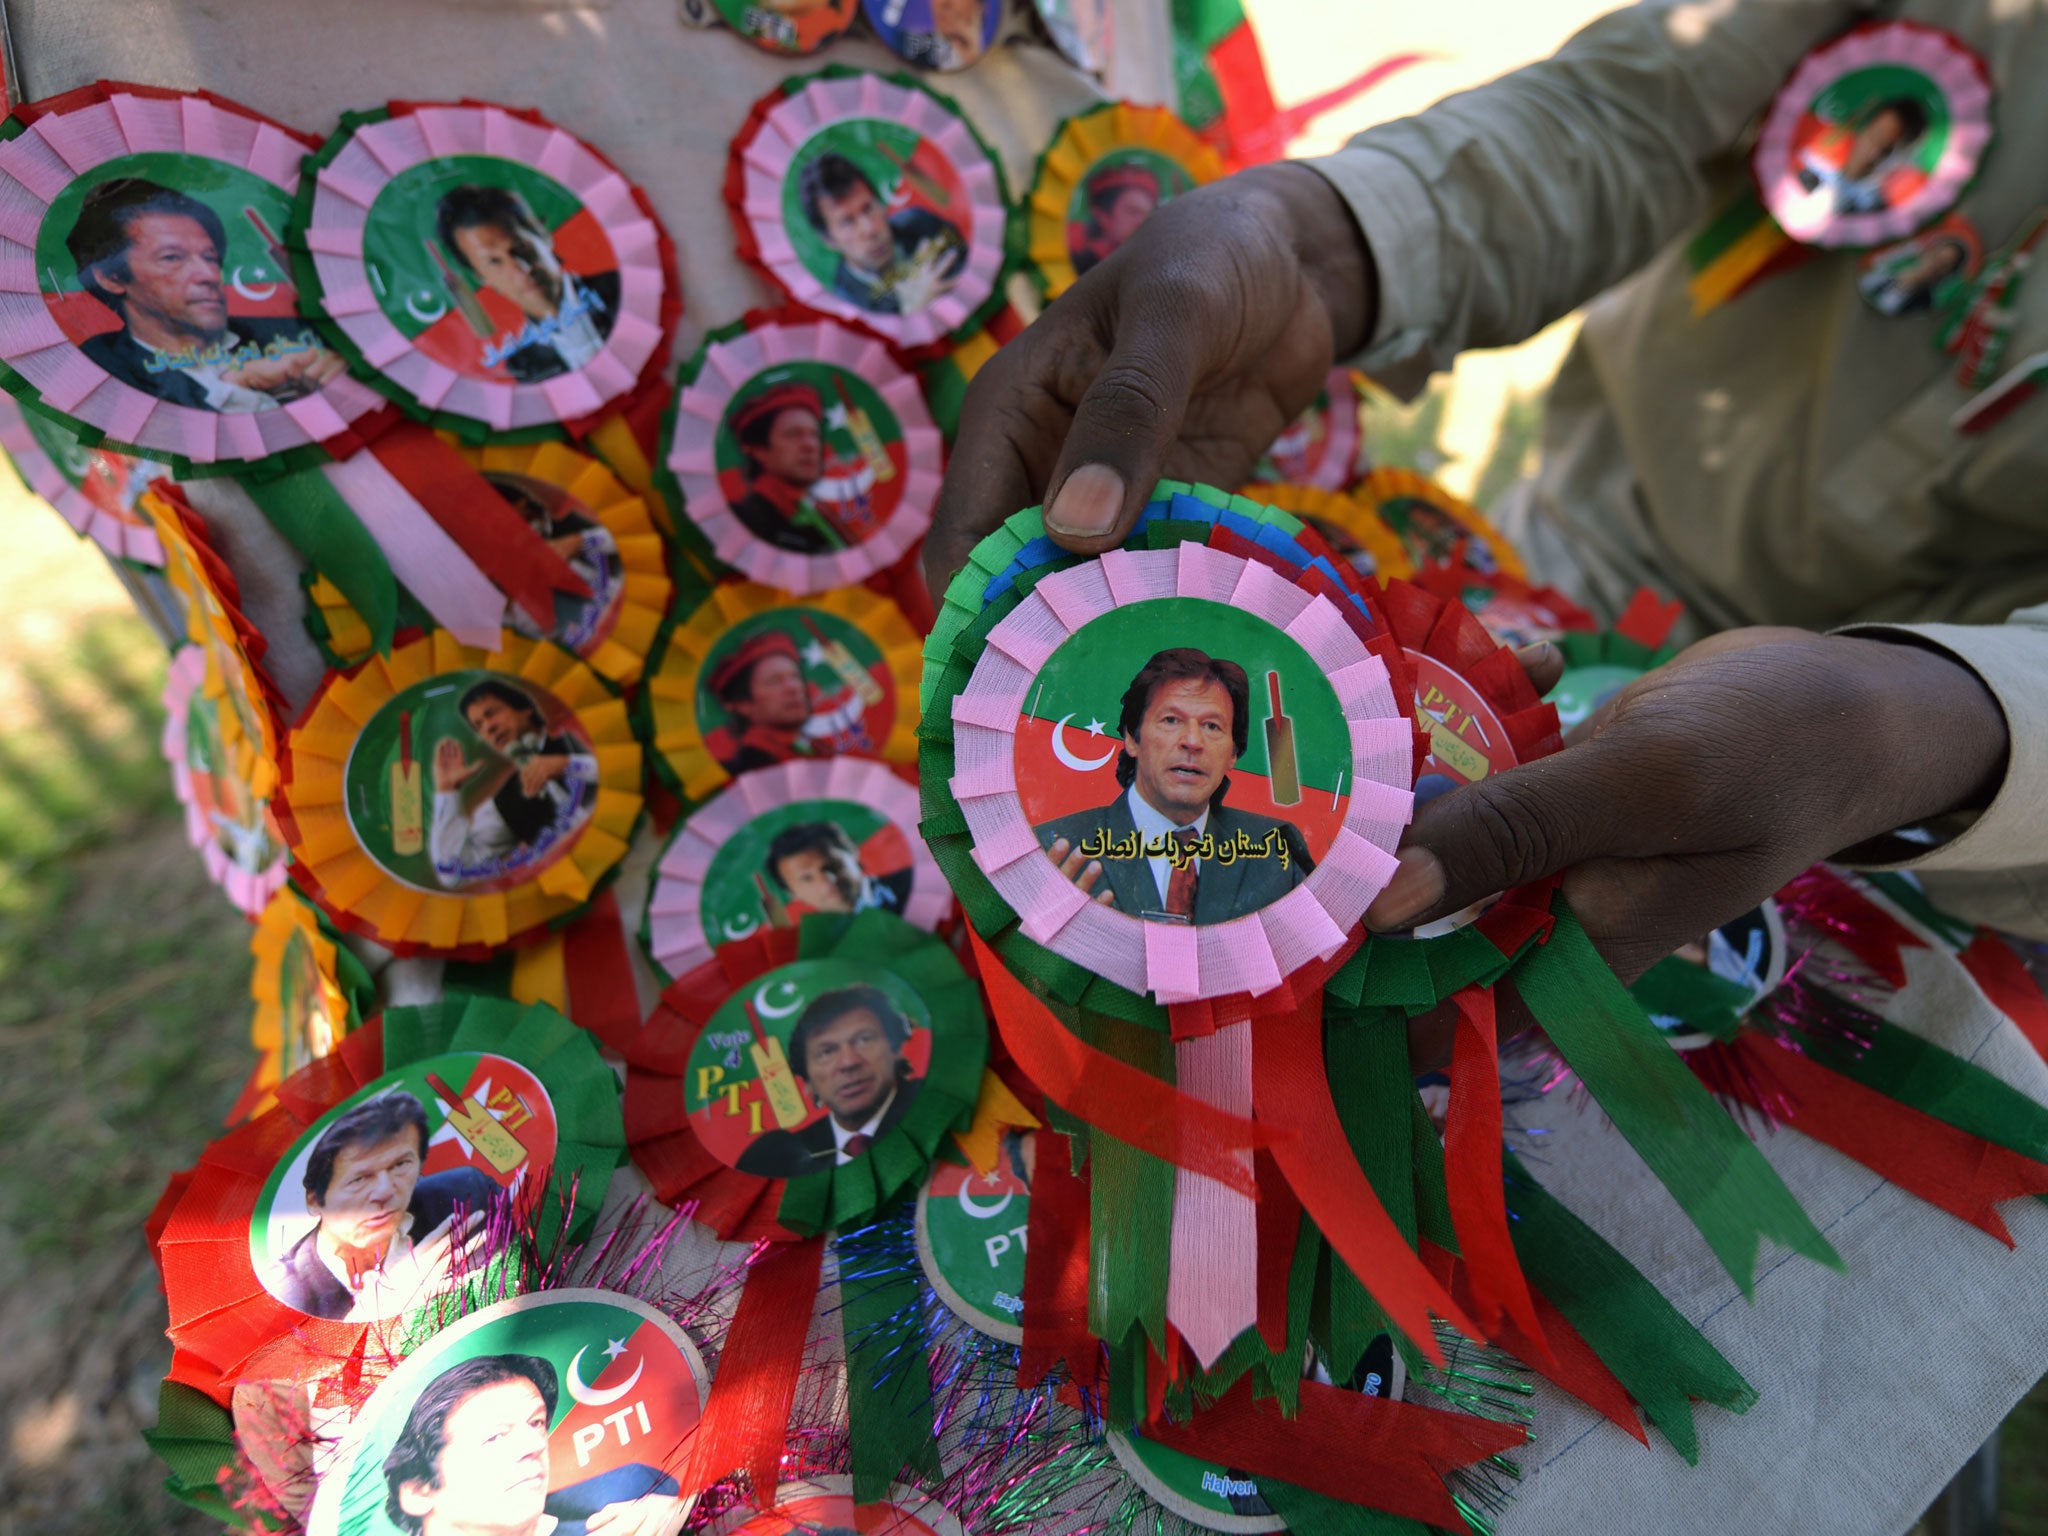 A Pakistani vendor arranges badges of Pakistani politician and former cricketer Imran Khan at the venue of an election campaign meeting by Khan's party Pakistan Tehreek-e-Insaf (PTI) in Islamabad on May 9, 2013.